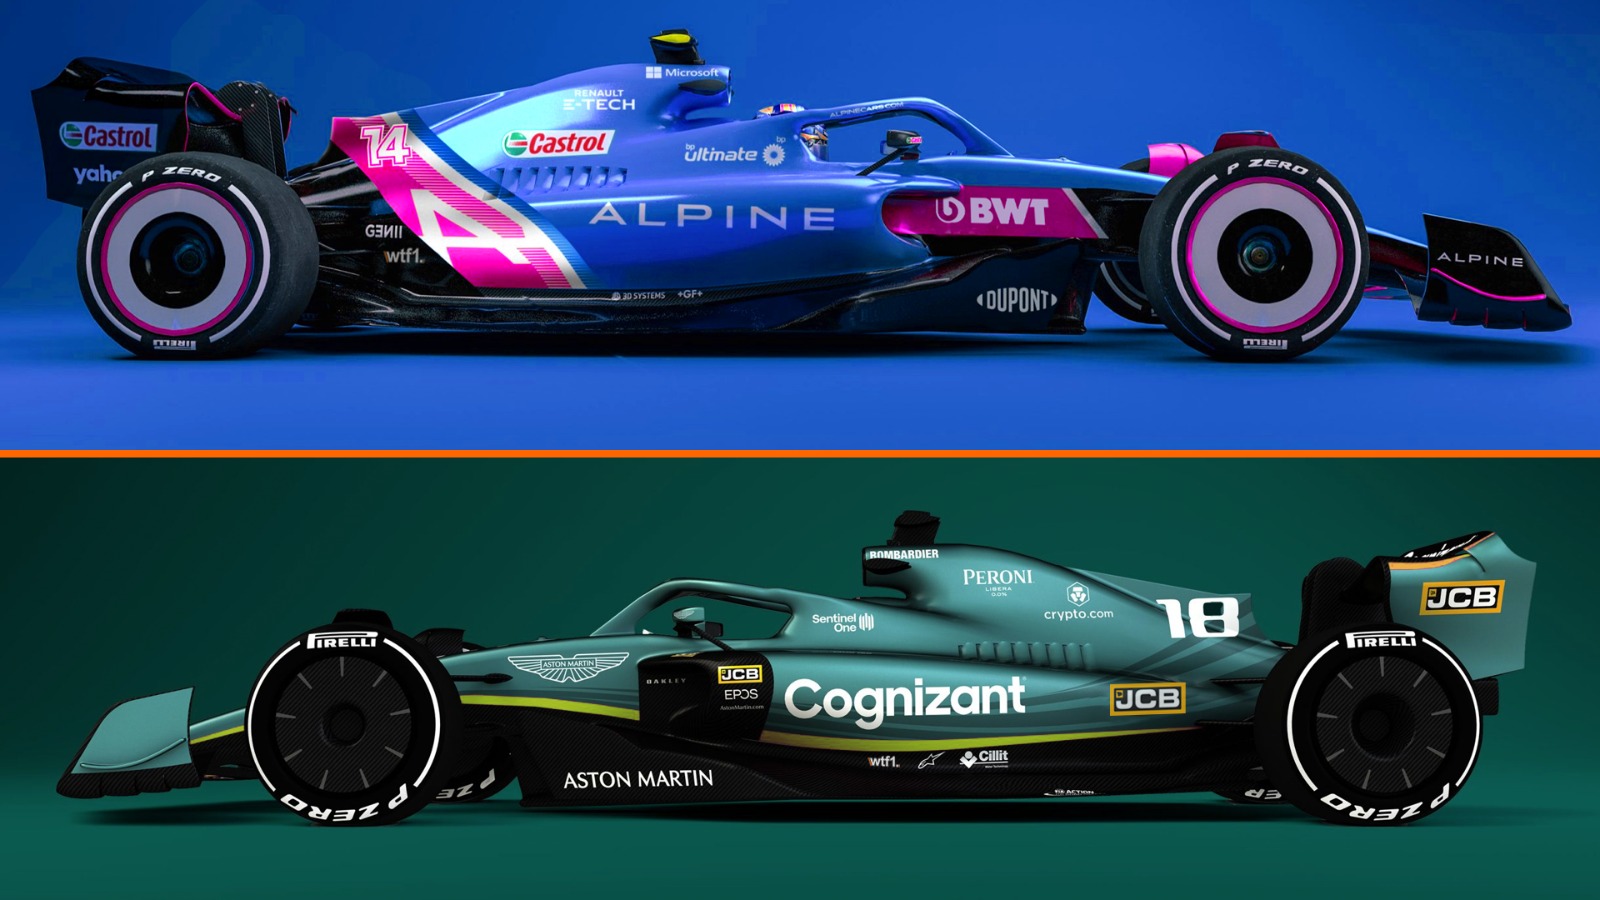 What Livery Changes Could We Expect In F1 This Season? WTF1